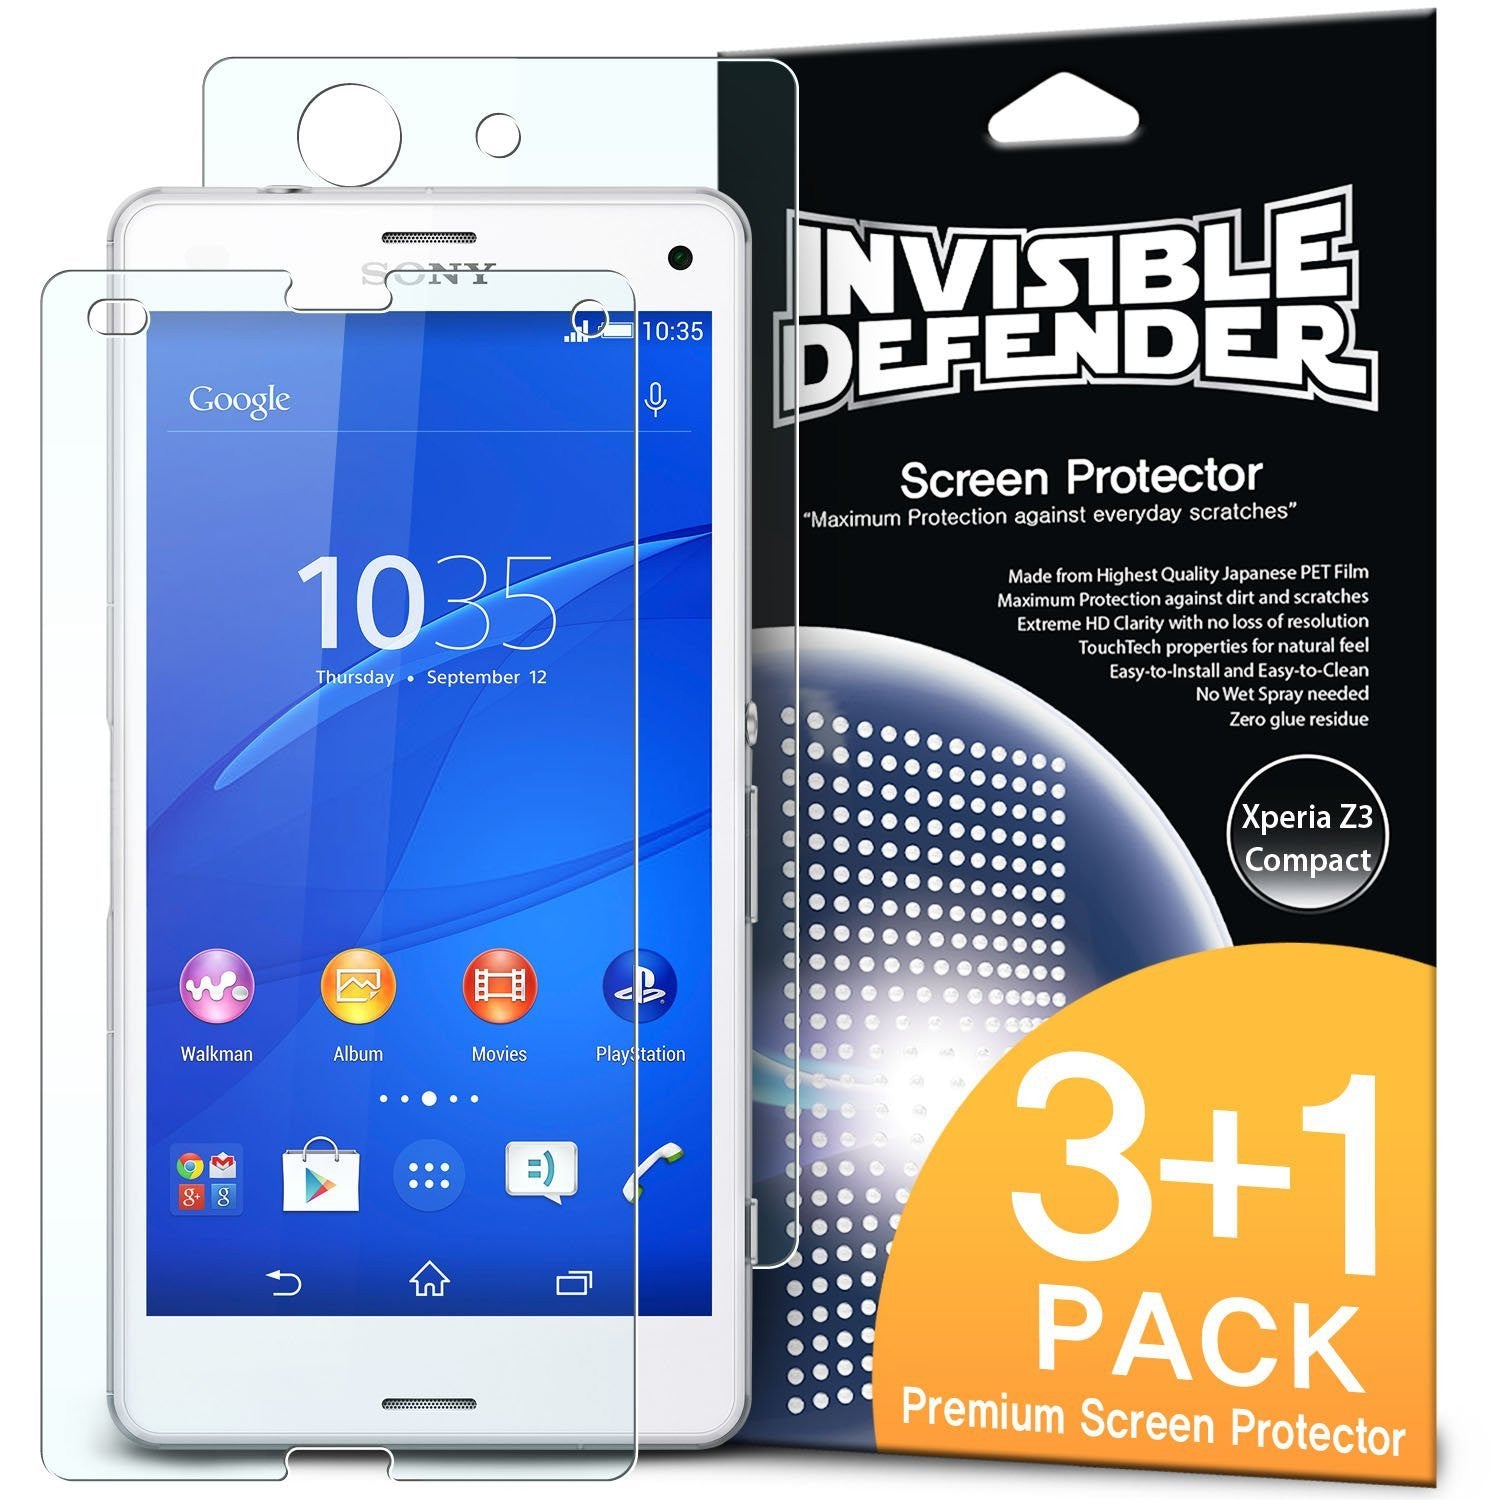 xperia z3 compact, ringke invisible defender 3+1 pack screen protector